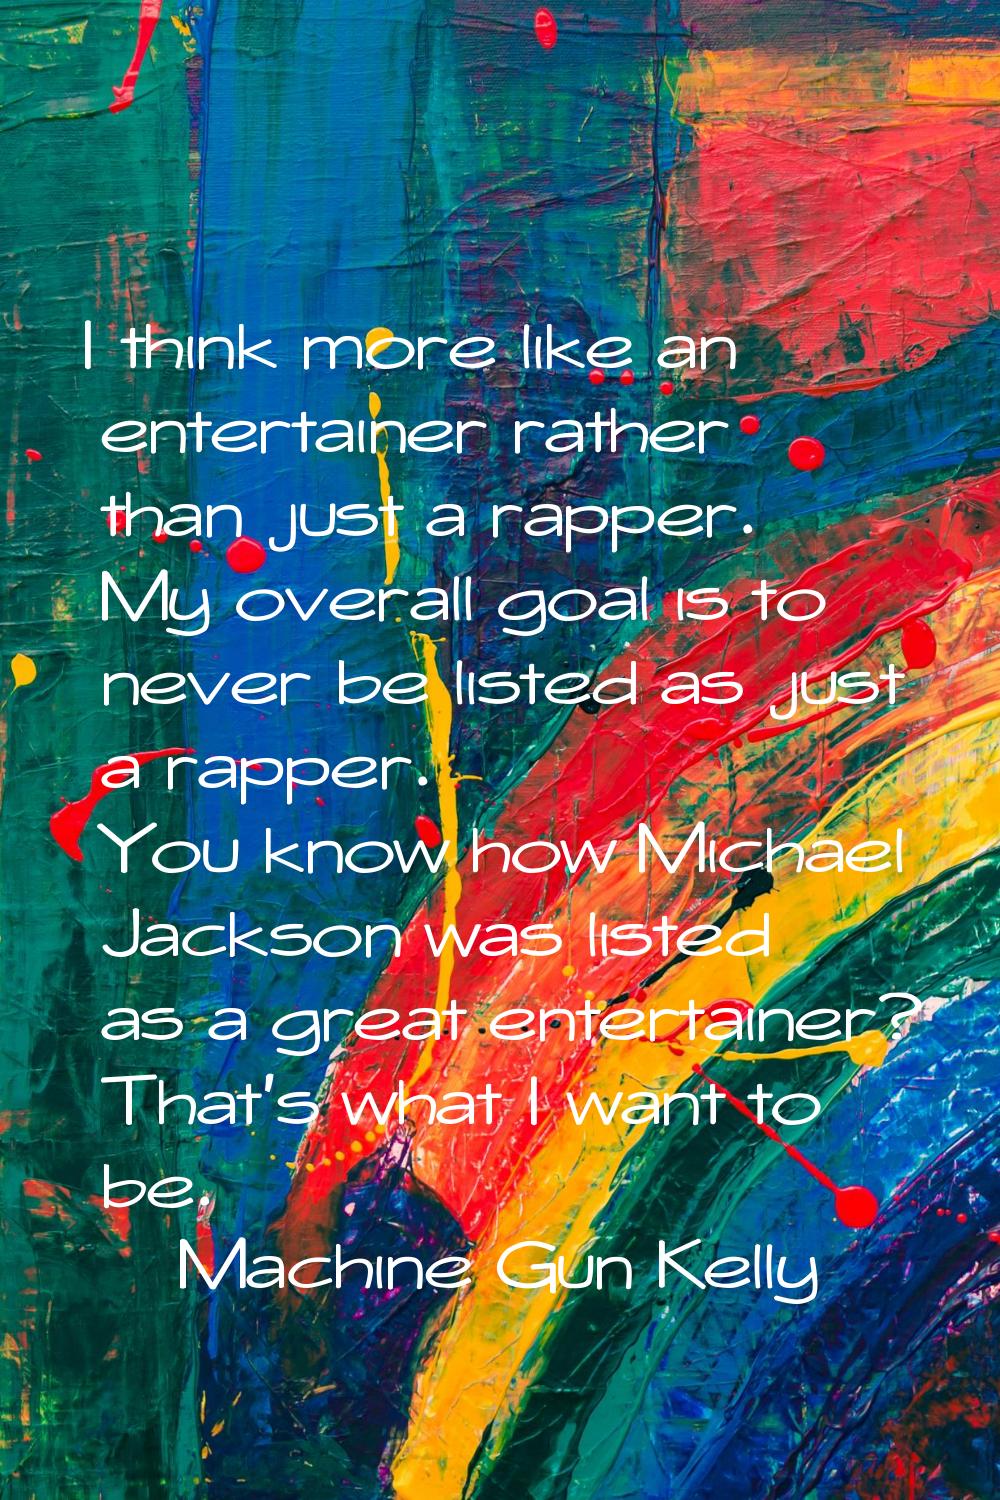 I think more like an entertainer rather than just a rapper. My overall goal is to never be listed a